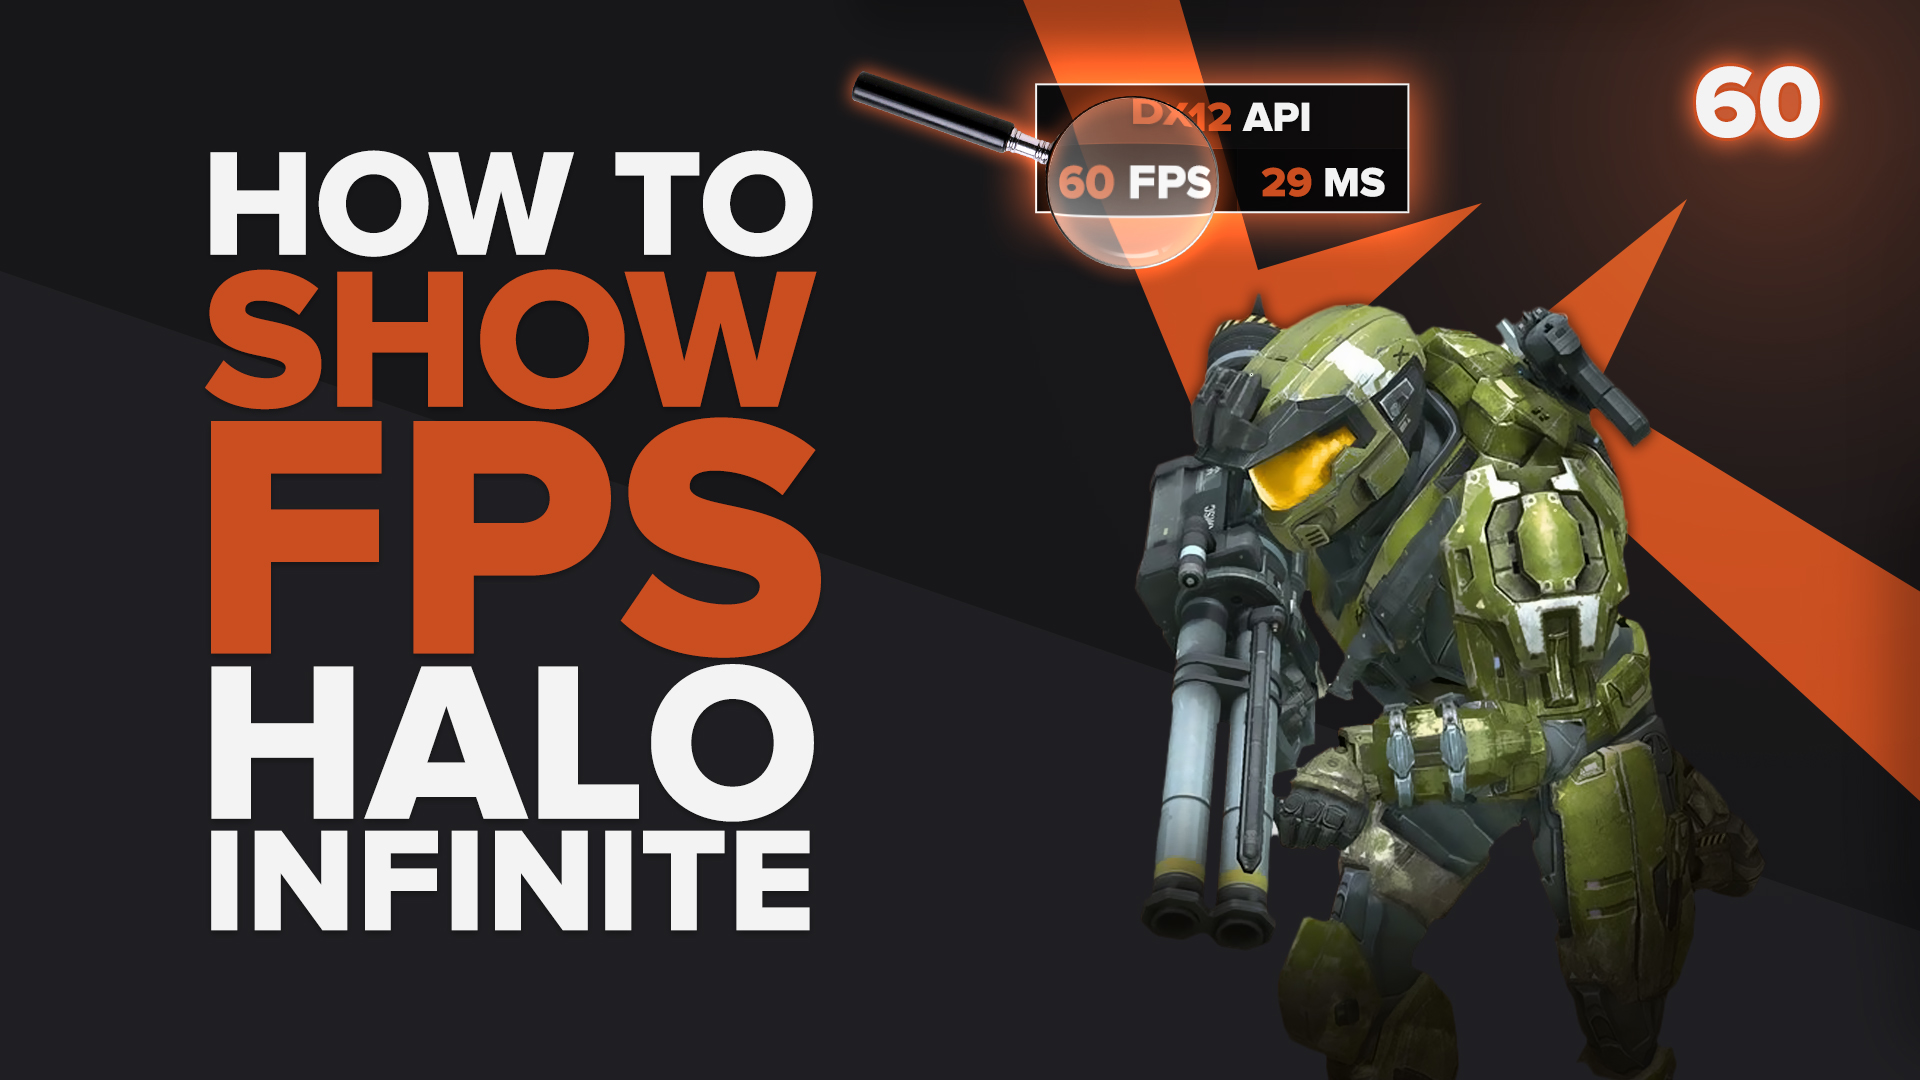 How to Enable Halo infinite fps counter